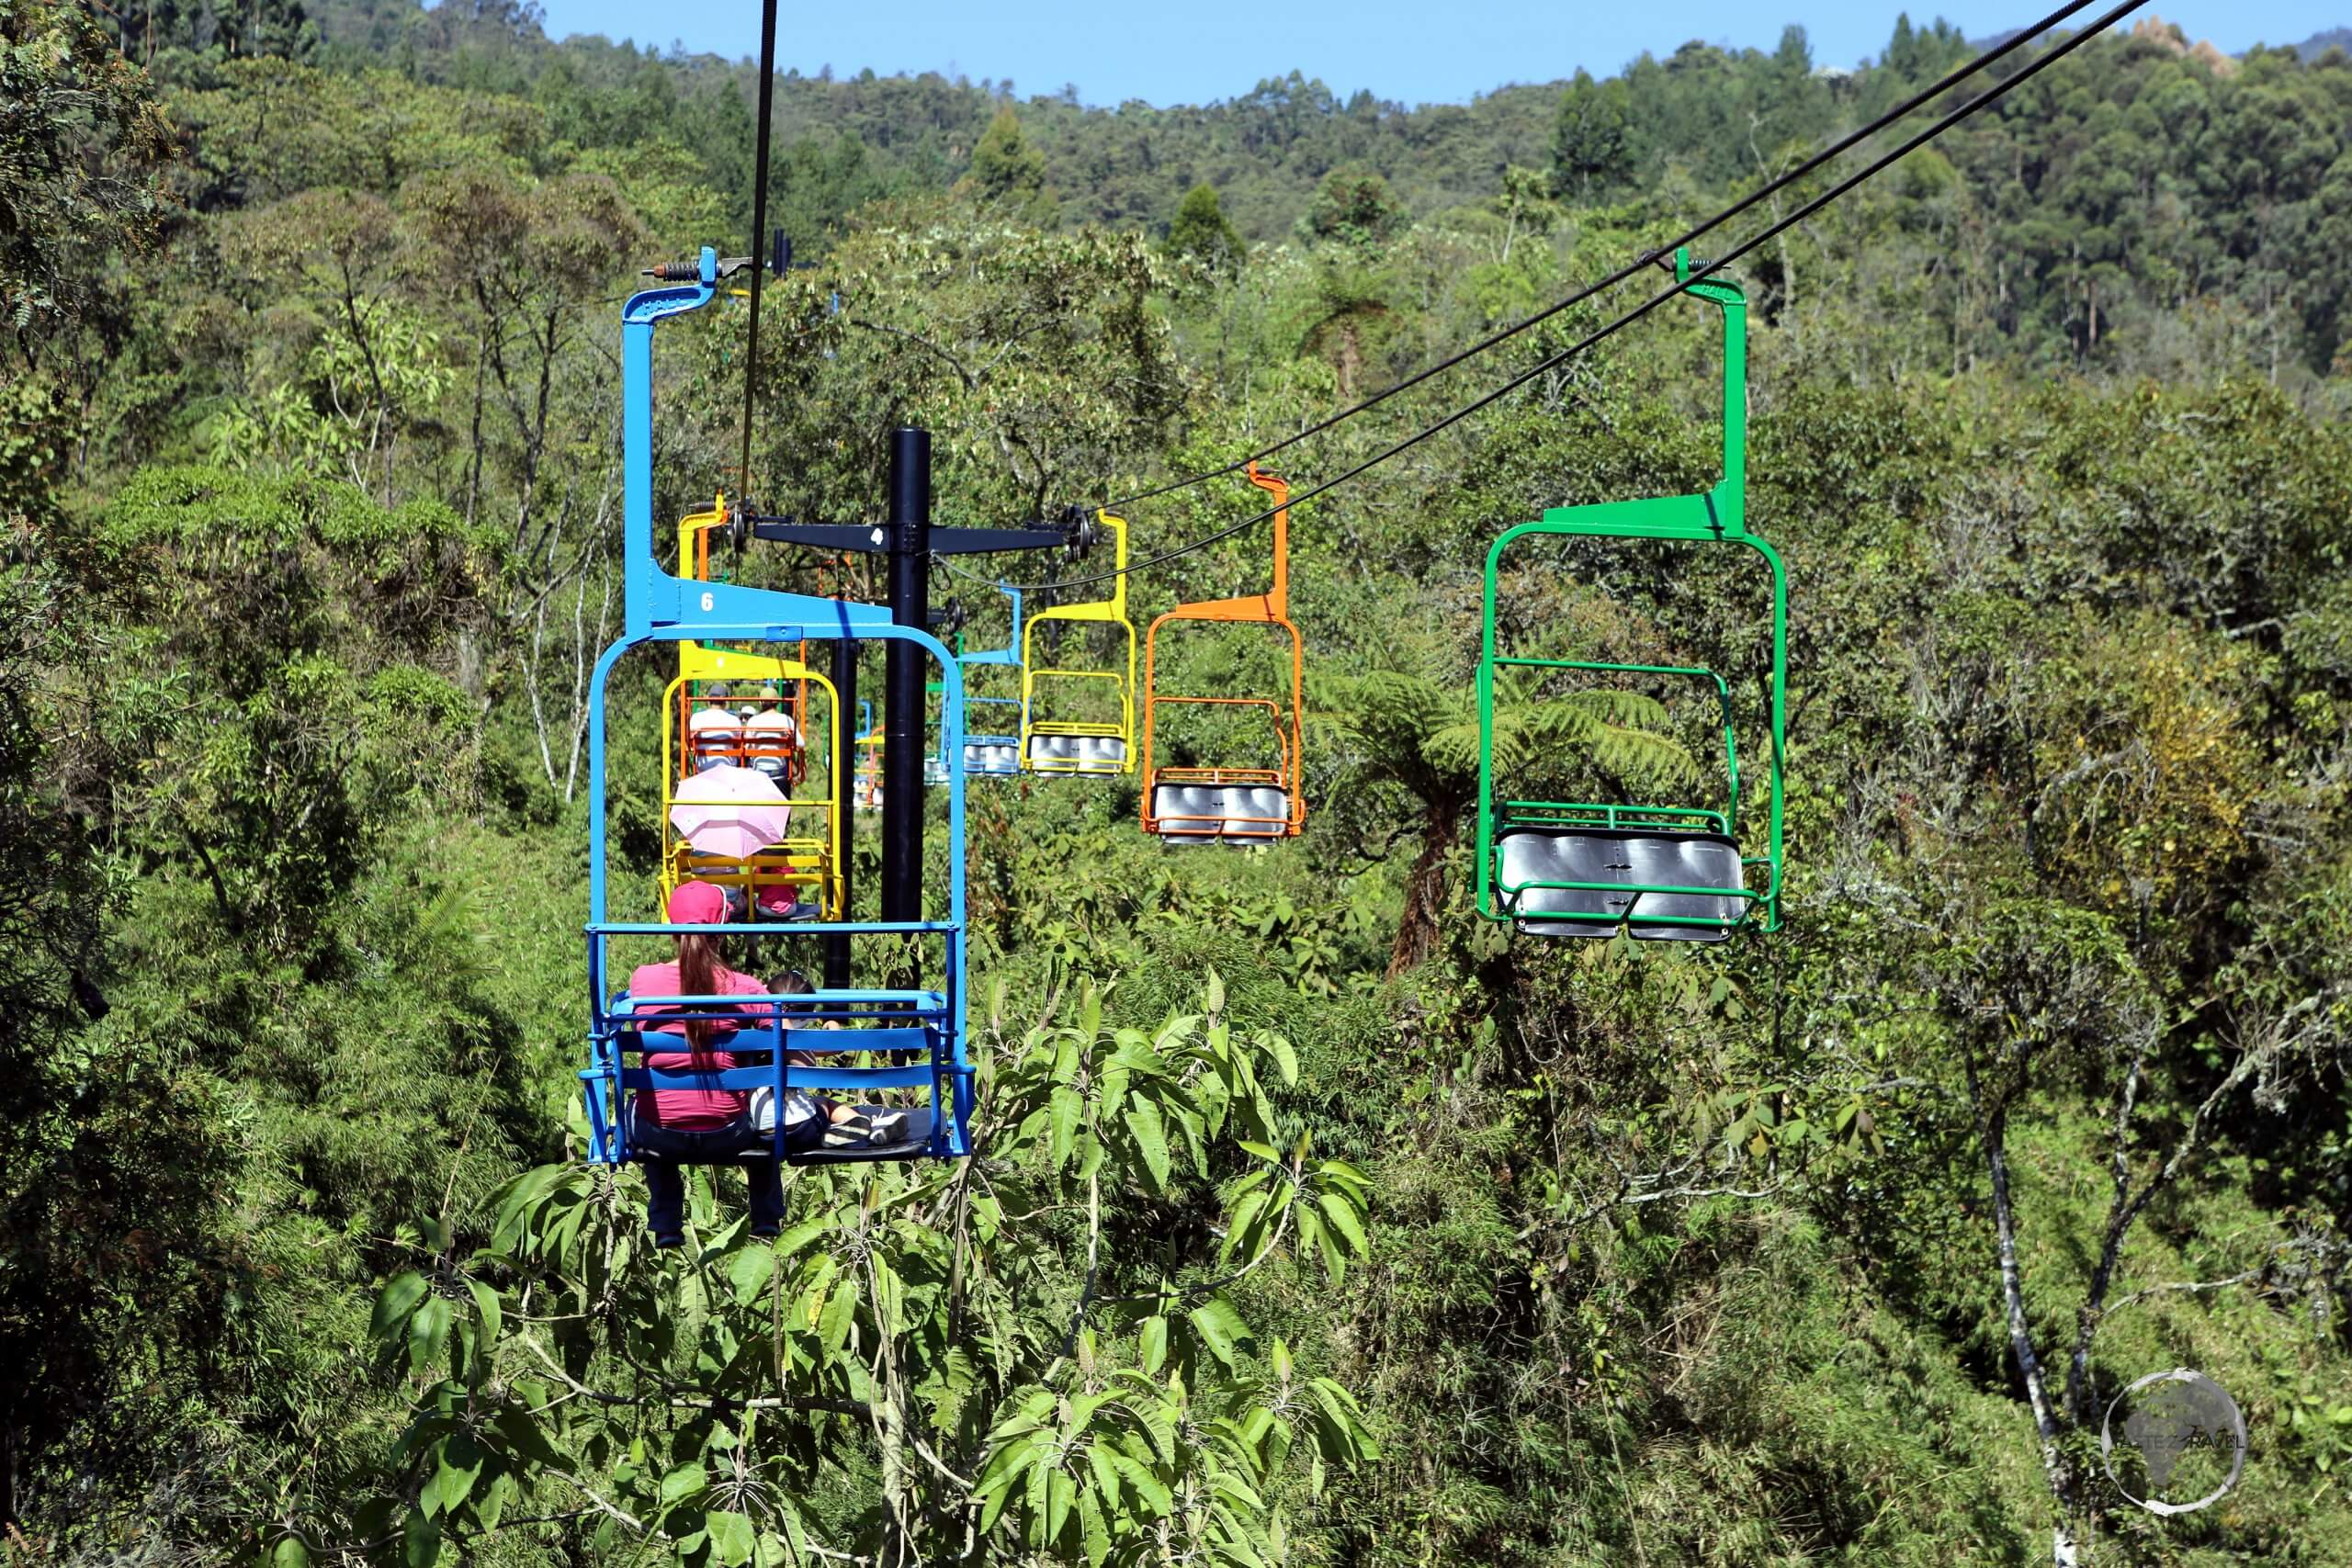 The 'Telesilla' at Estelar Recinto Del Pensamiento offers a 12 minute ride over the cloud forest to a bird viewing station.